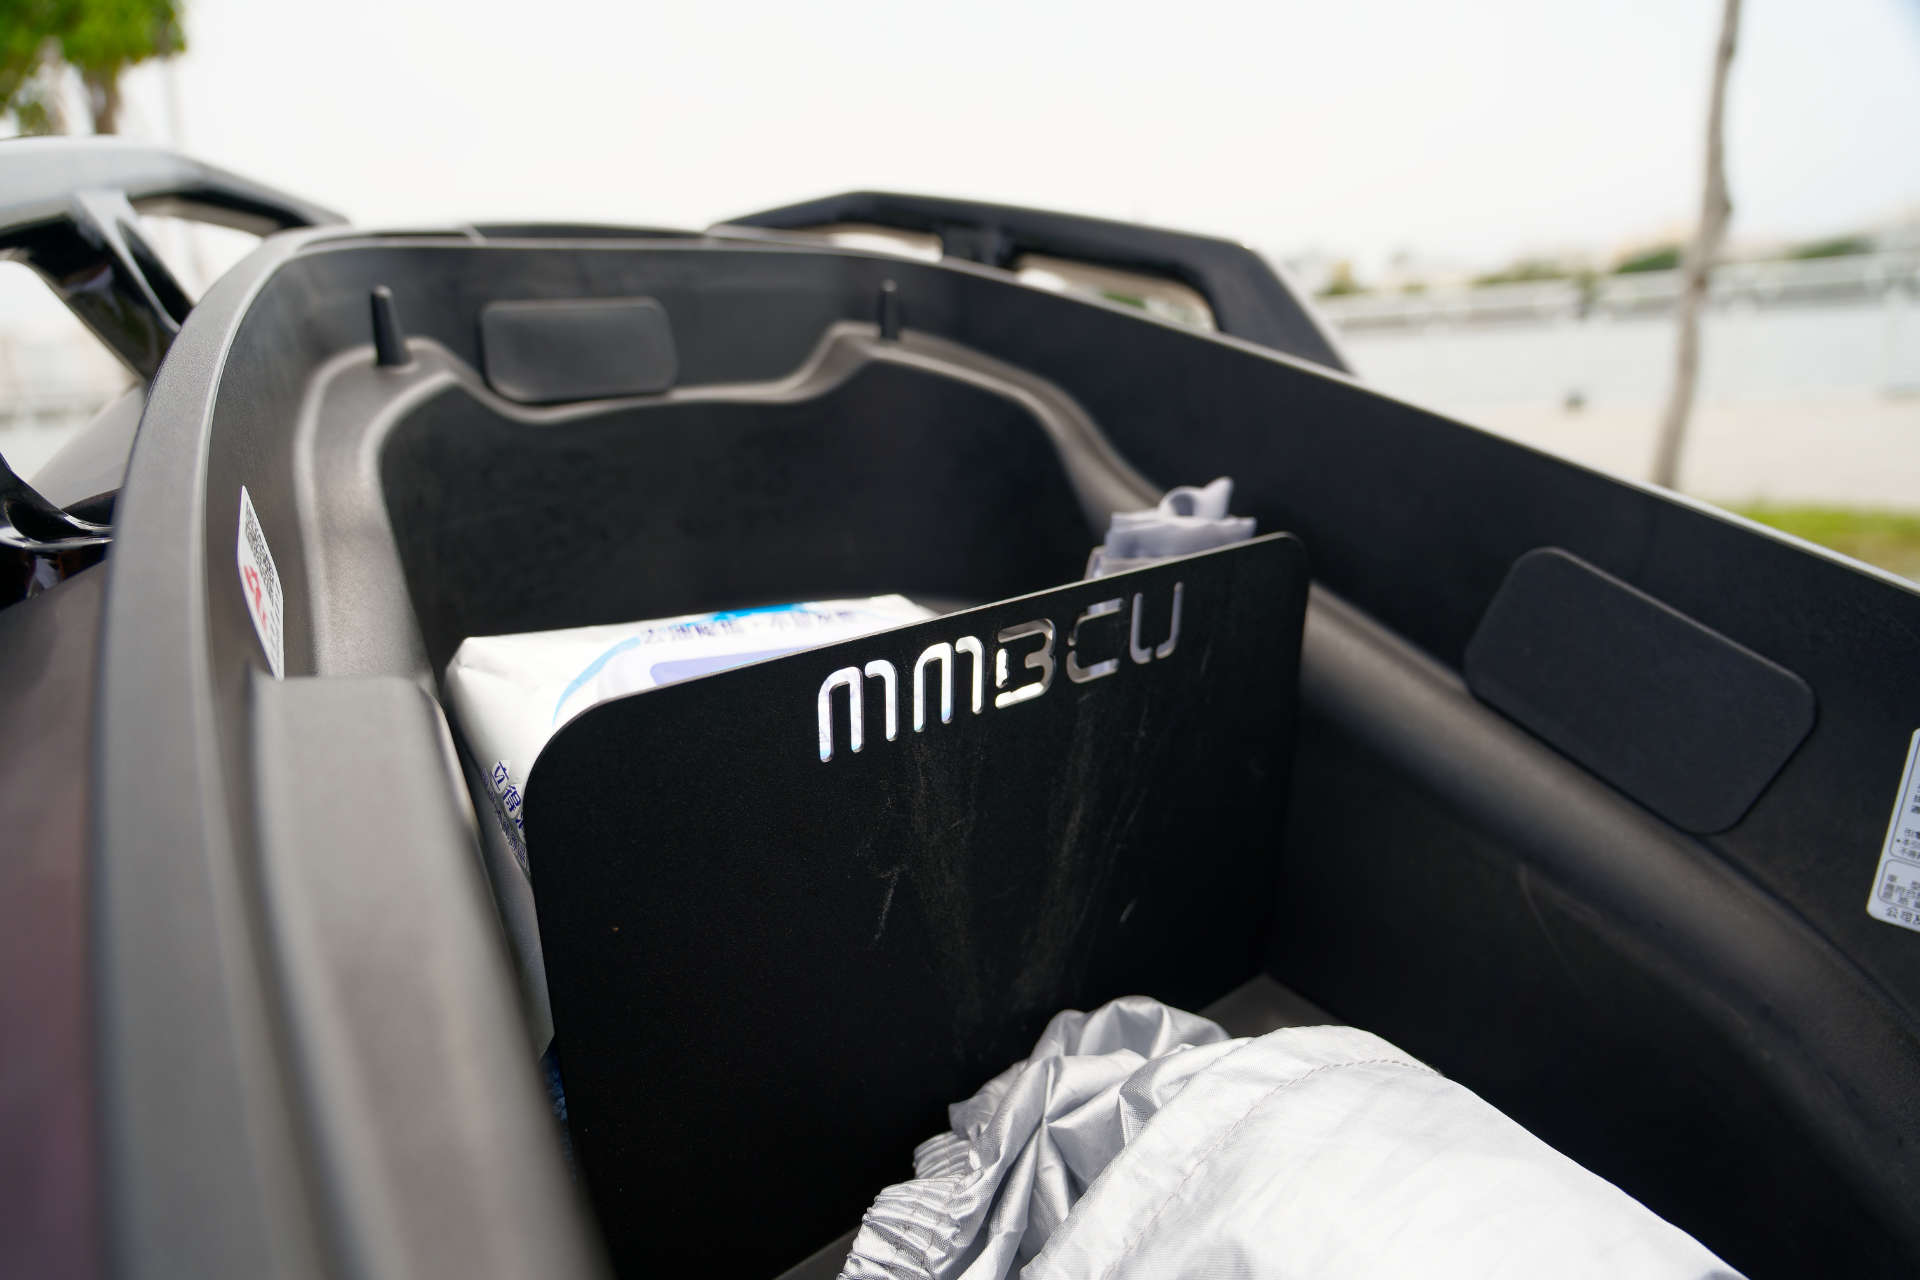 An MMBCU-branded storage divider mounted on an SYM MMBCU scooter.